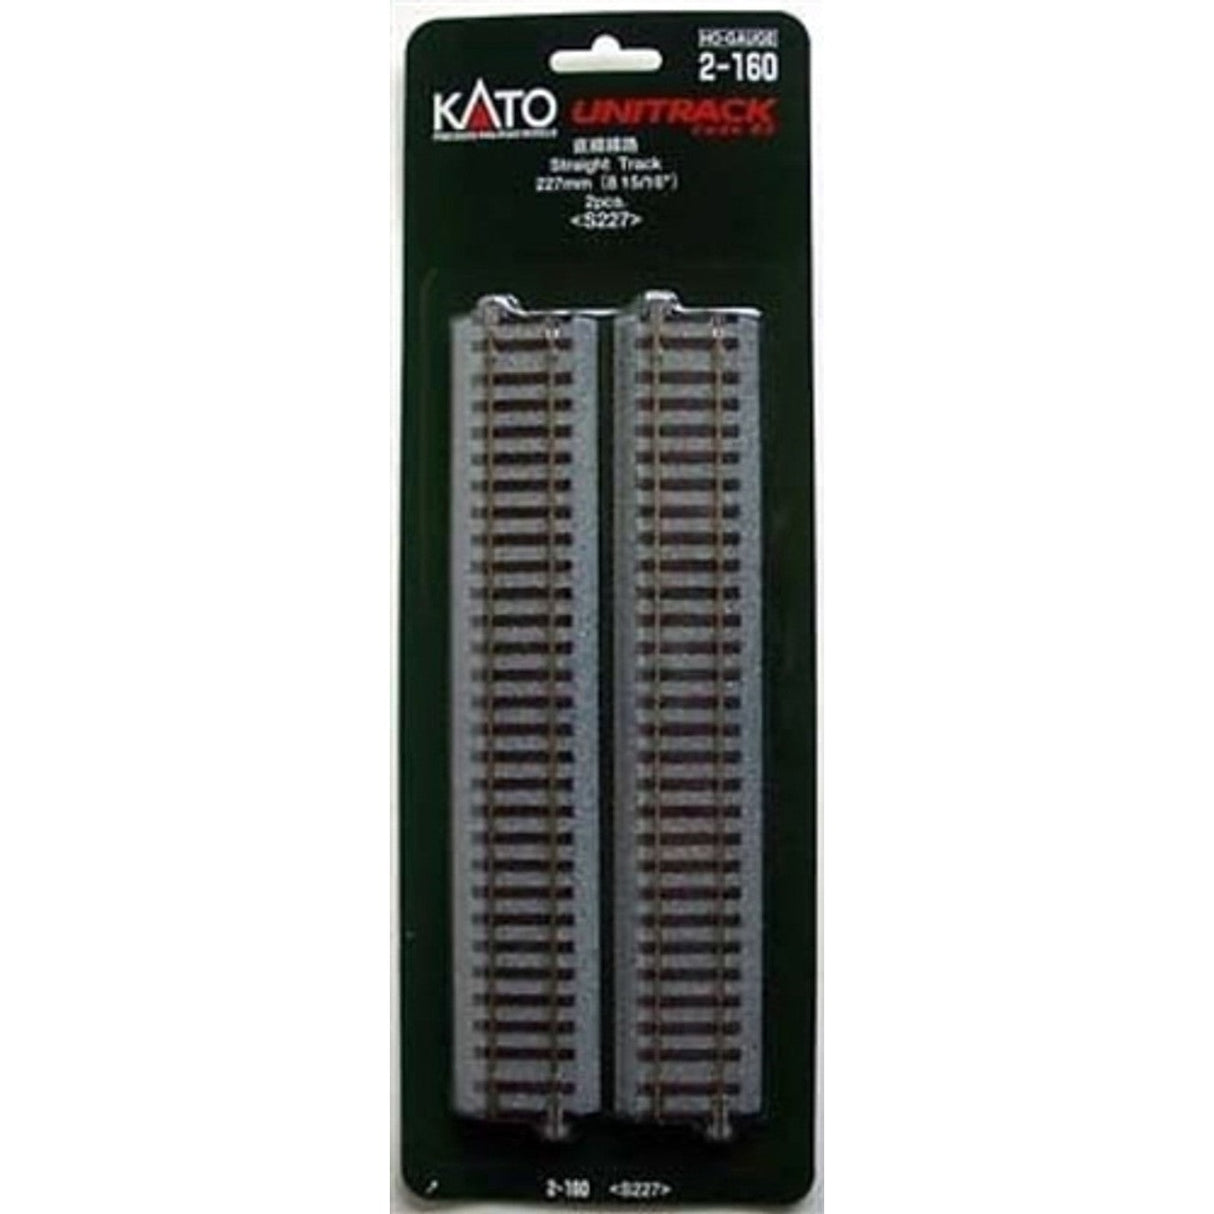 Kato HO Scale 227mm / 8 15/16" Straight Track 2 Pack